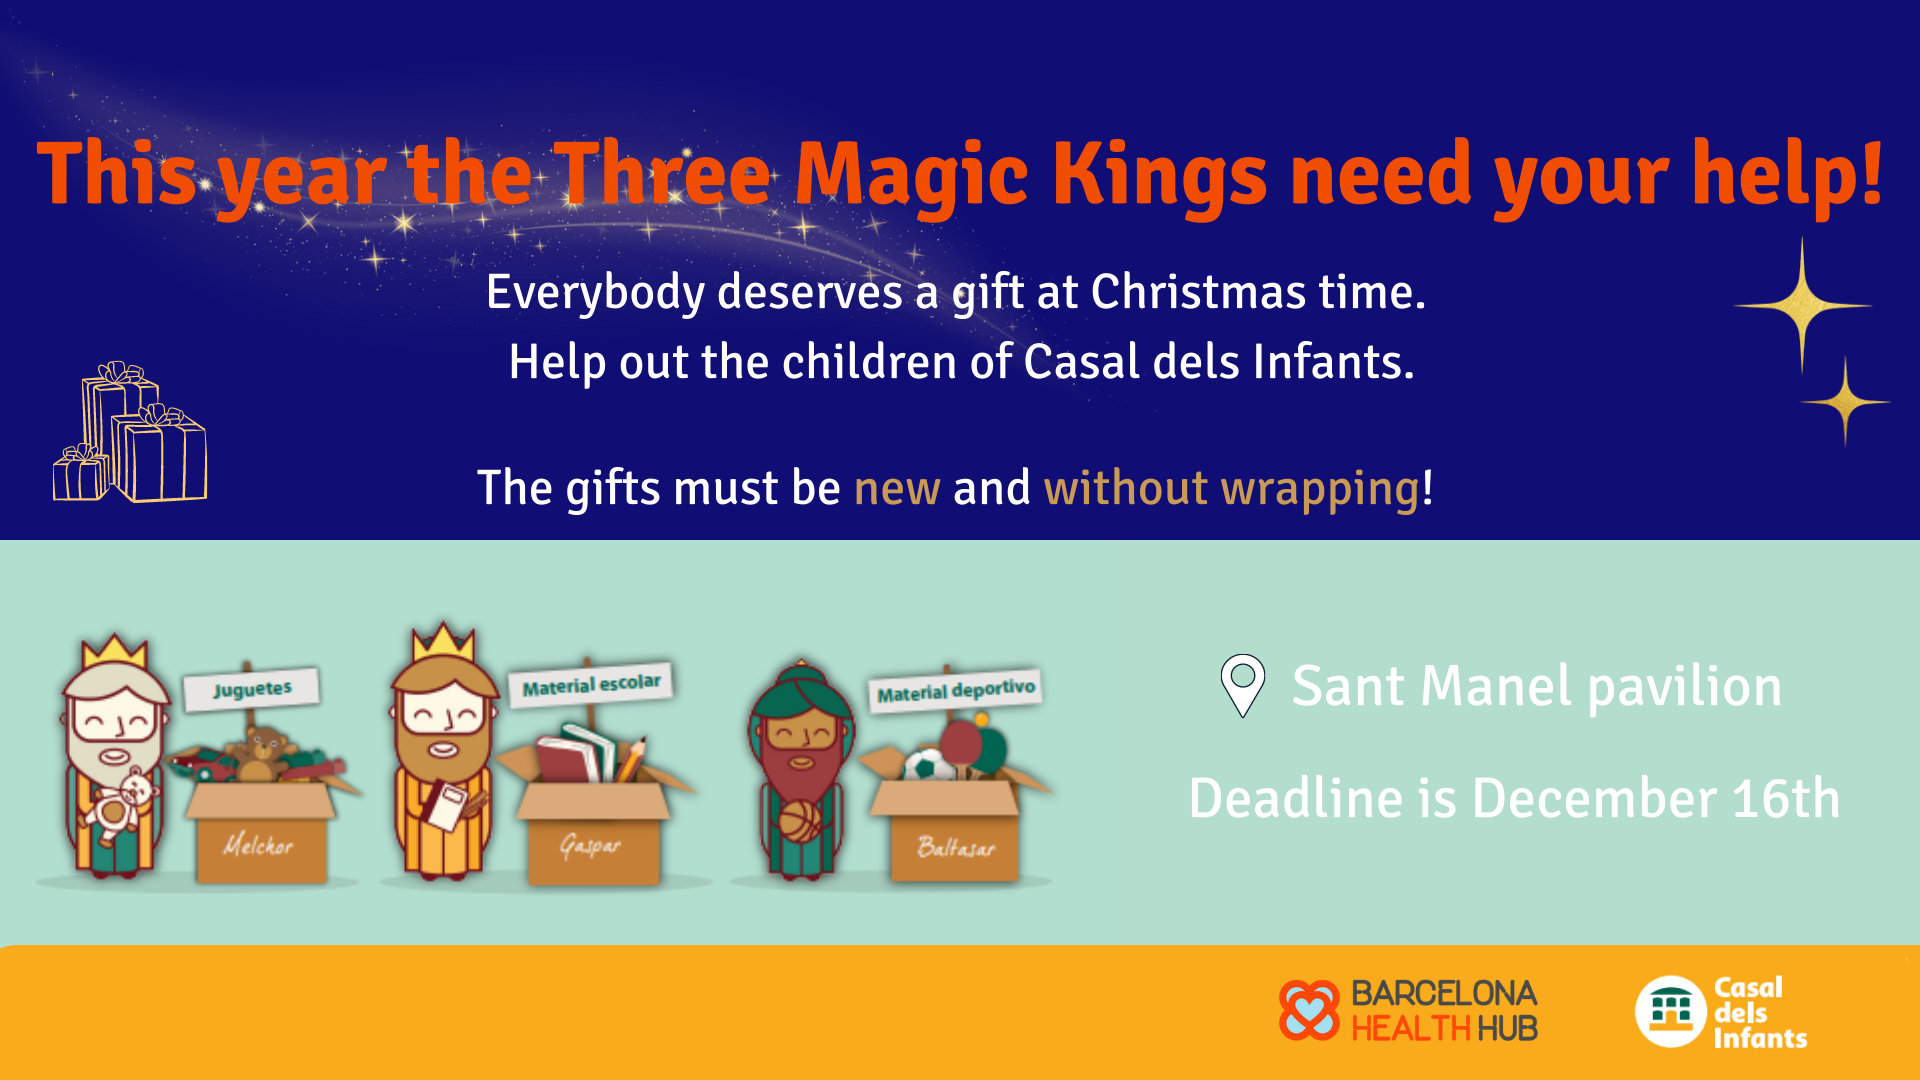 This year the Three Magic Kings need your help!